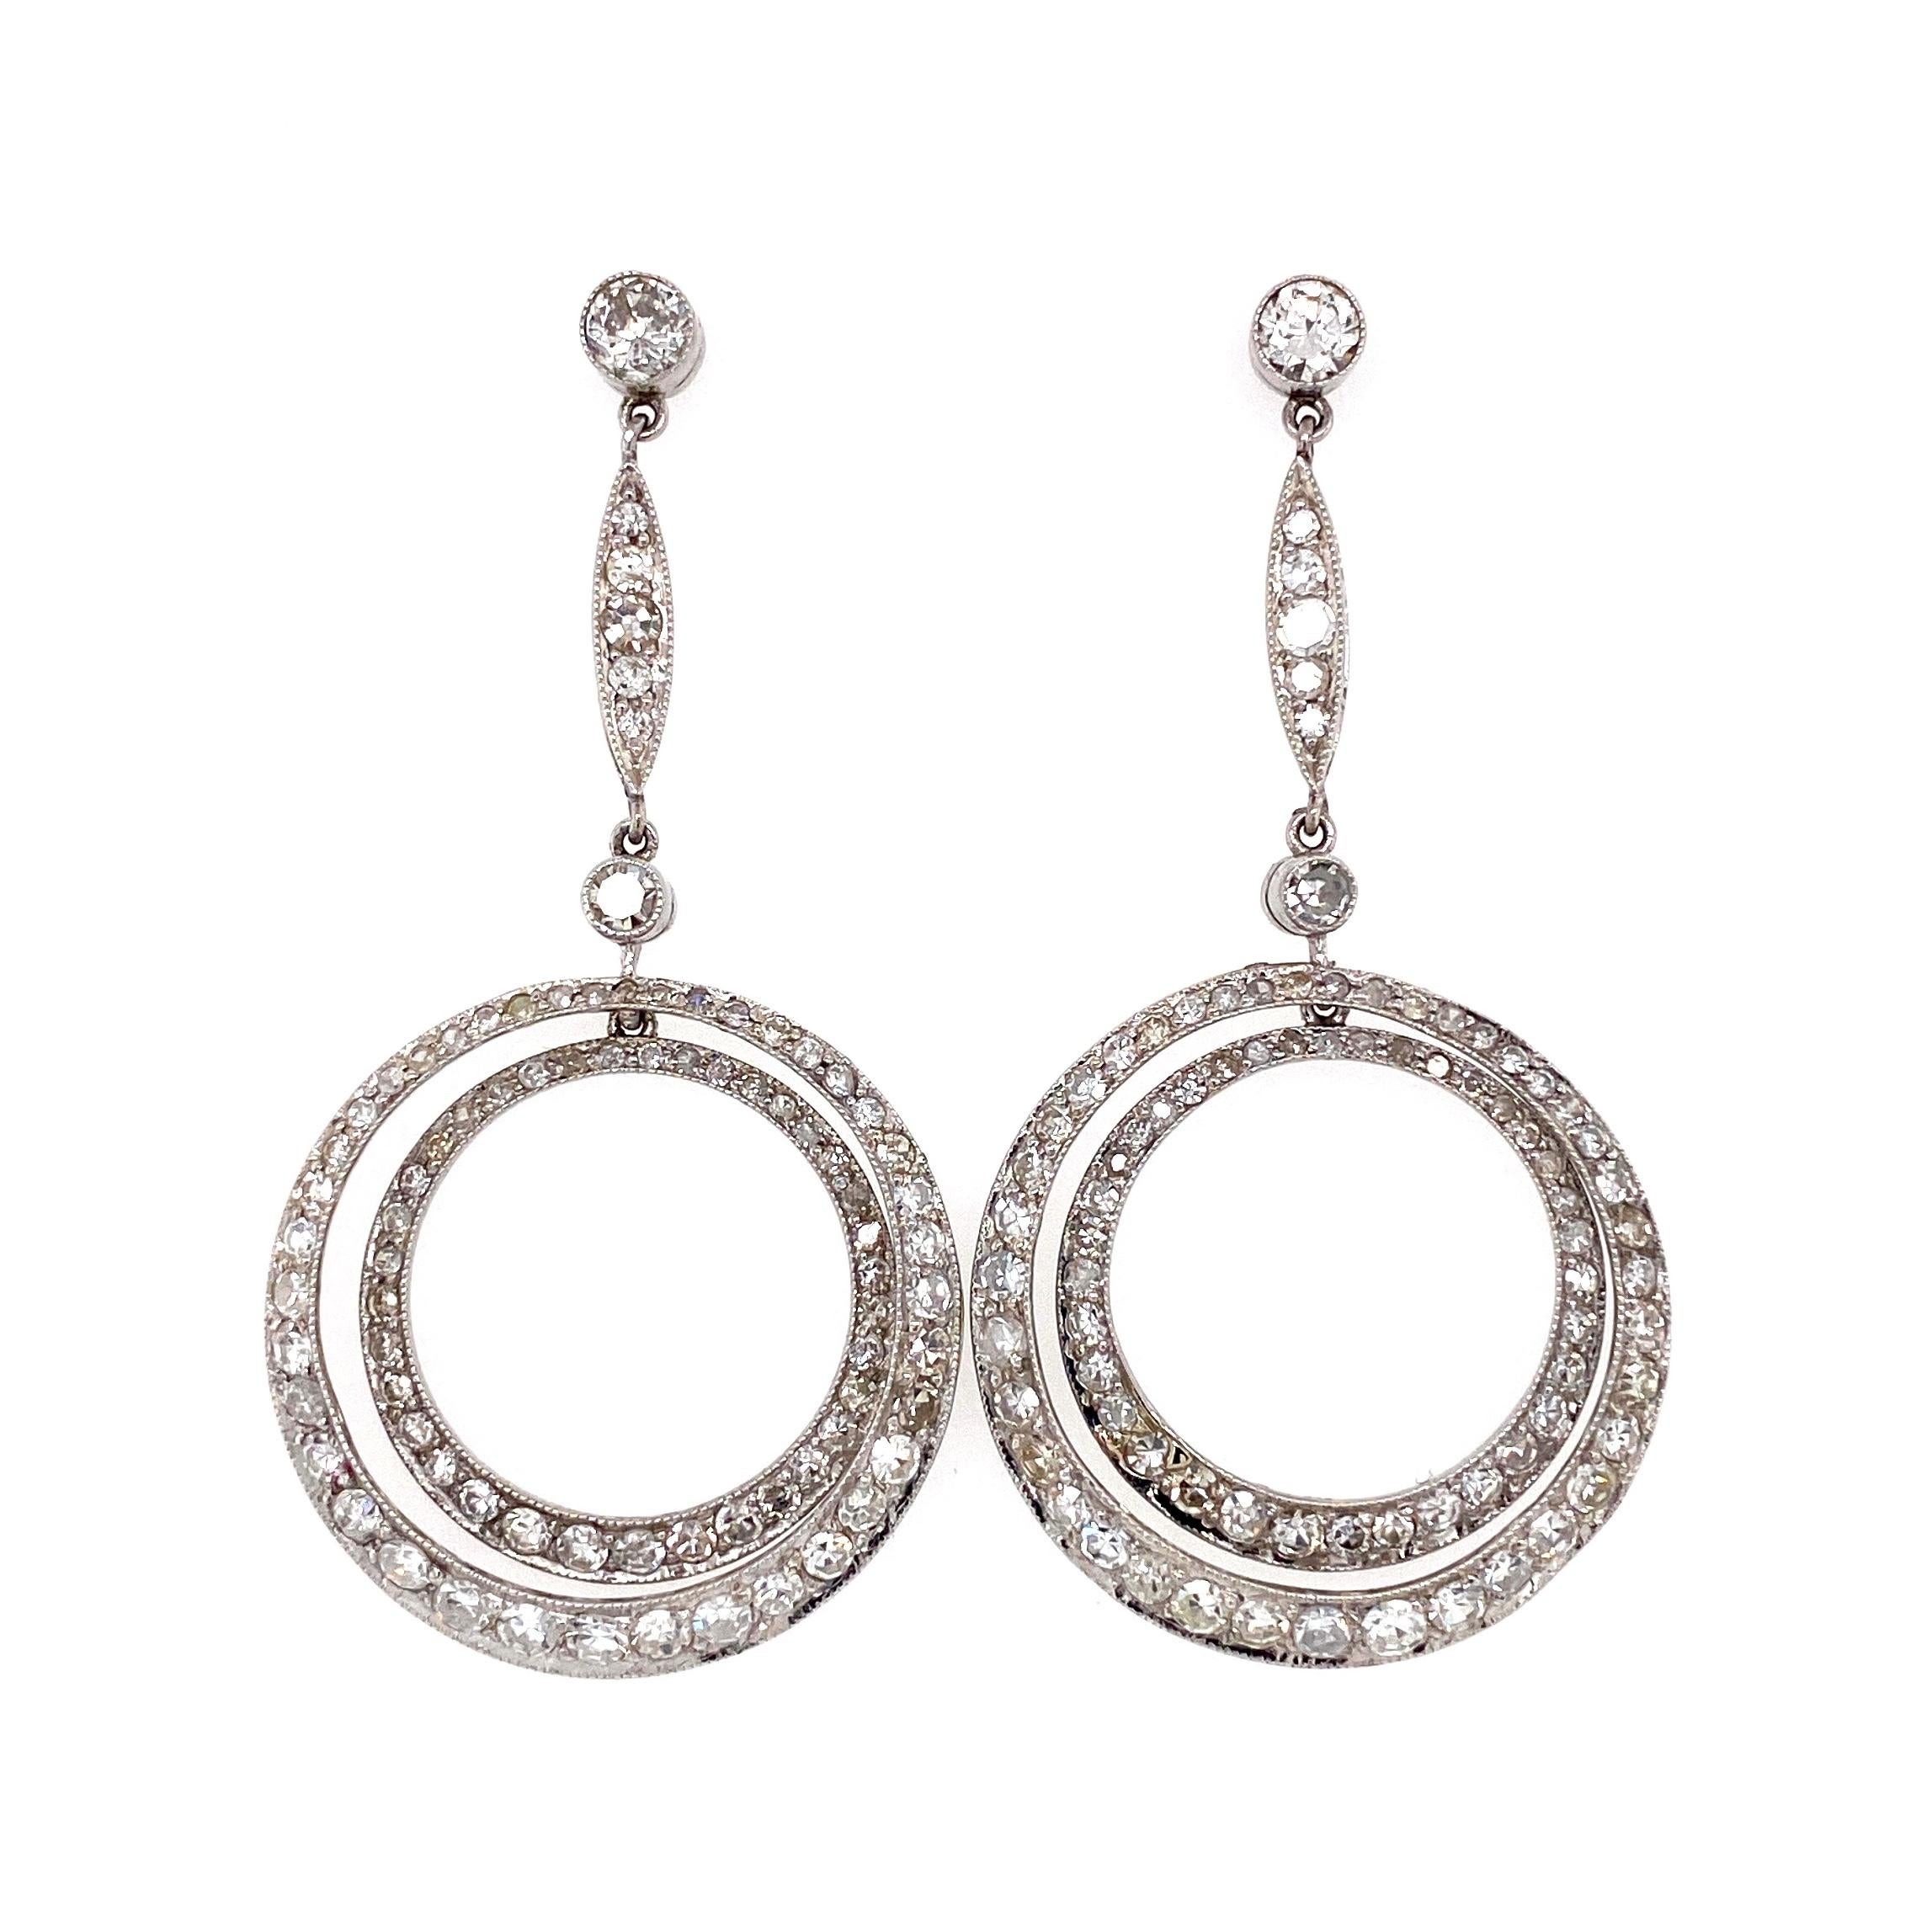 Simply Beautiful! Finely Detailed Art Deco Revival Double Circle Diamond Drop Earrings. Hand crafted in Platinum and Hand set with round diamonds, approx. 4.50tcw. Earrings measuring approx. 2” l x 1” w. The earrings are in excellent condition and